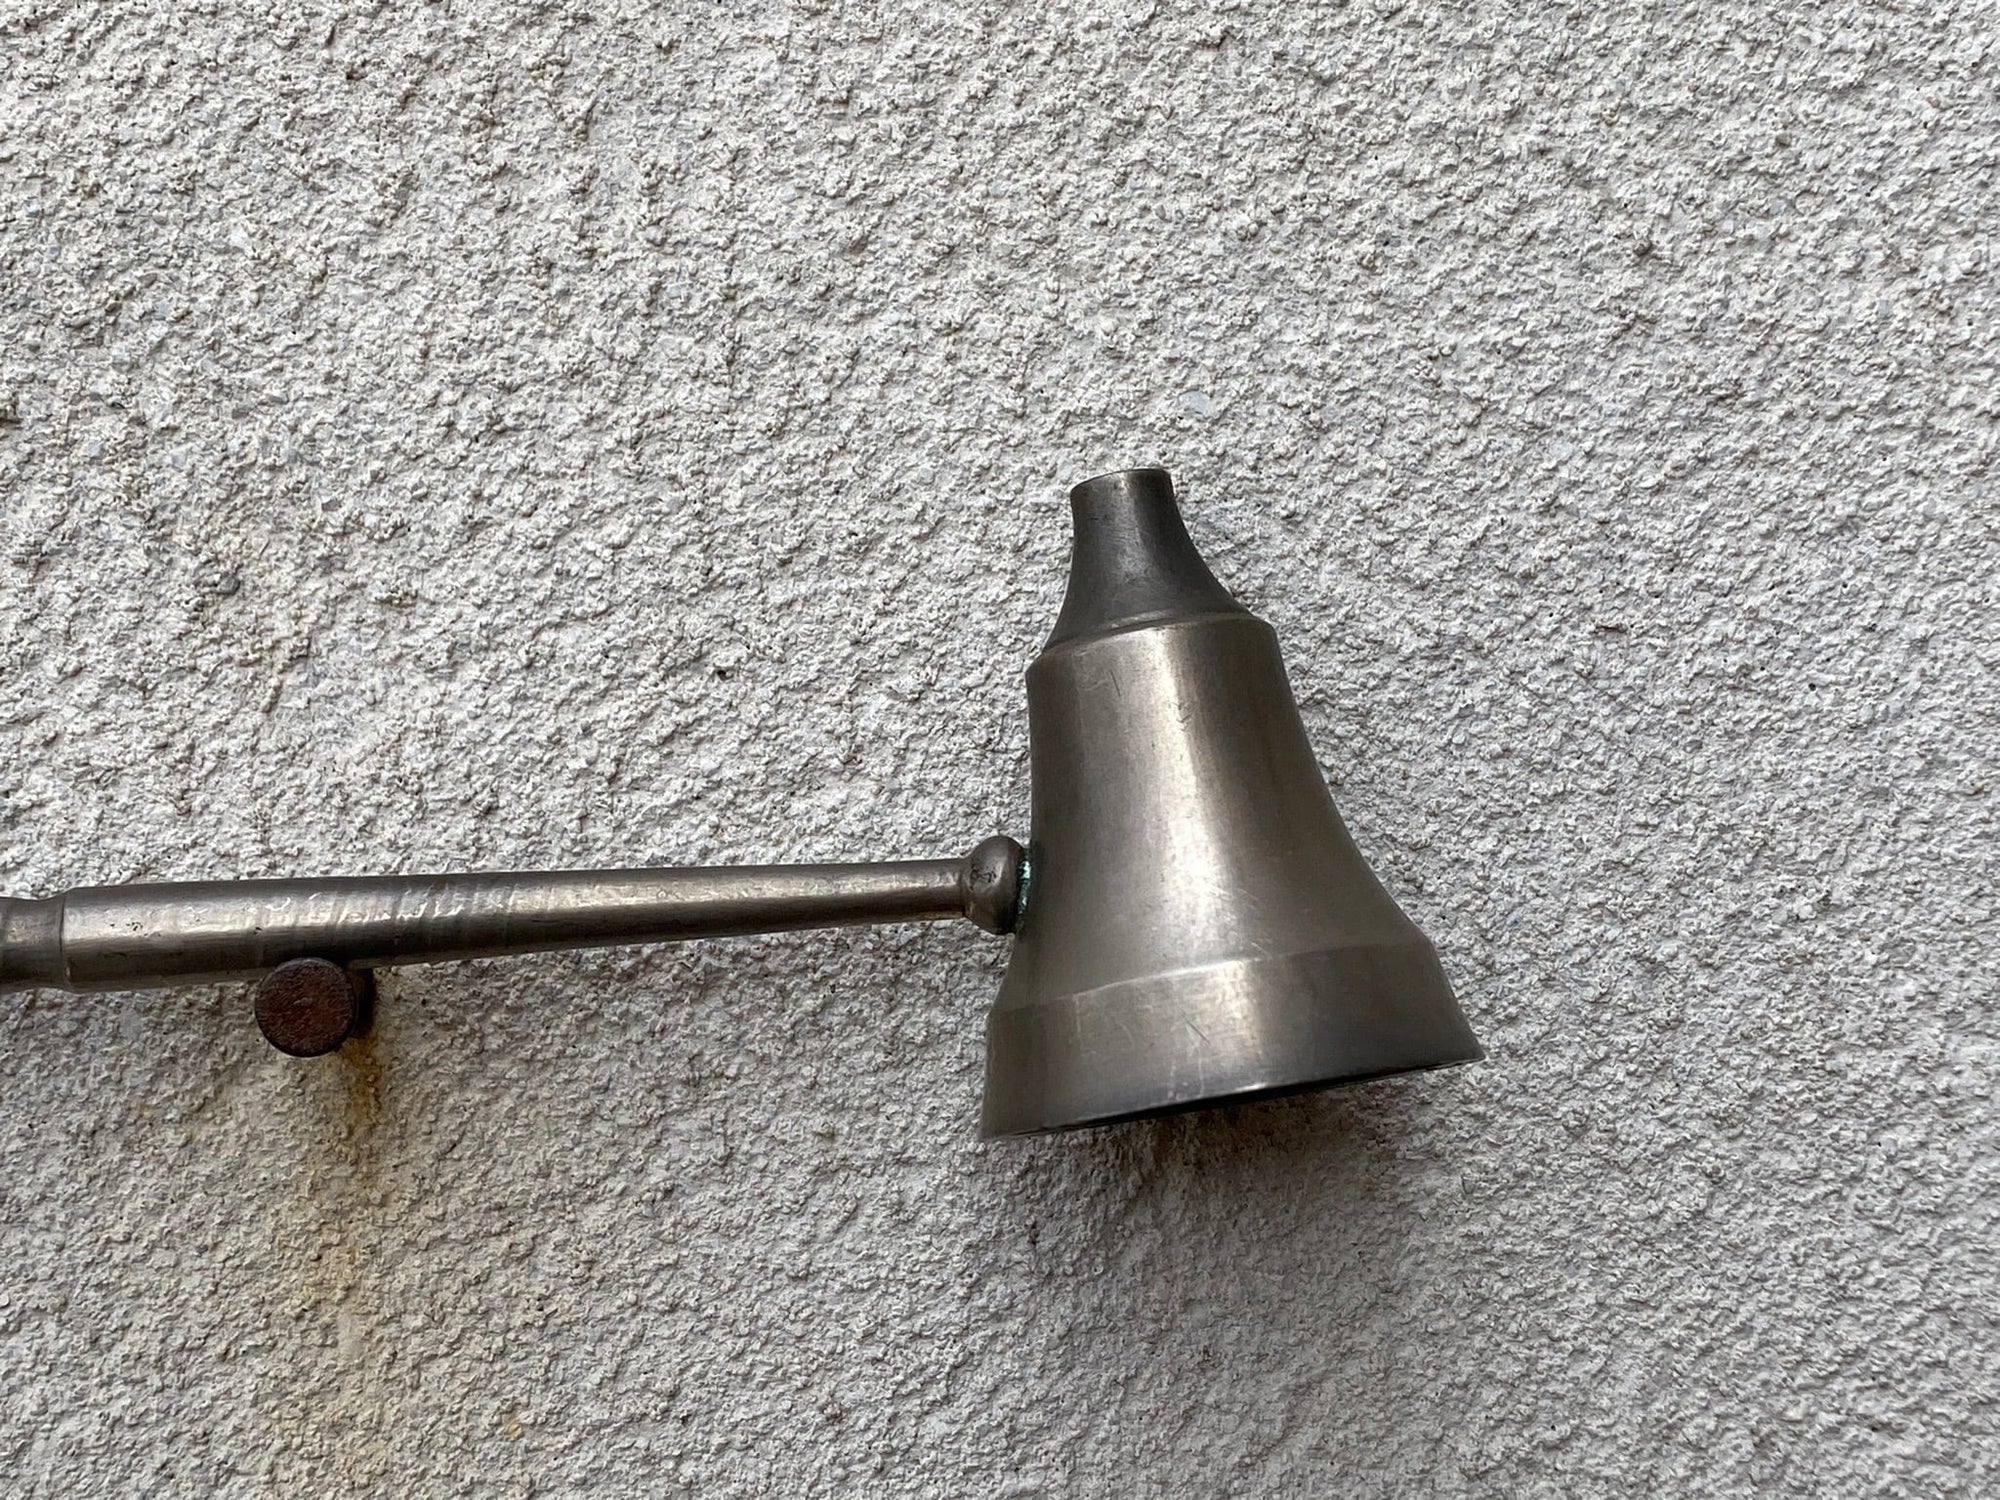 I Like Mike's Mid Century Modern Candle Snuffers Silver Plated Metal Candle Snuffer with Wood Handle 8" Reach